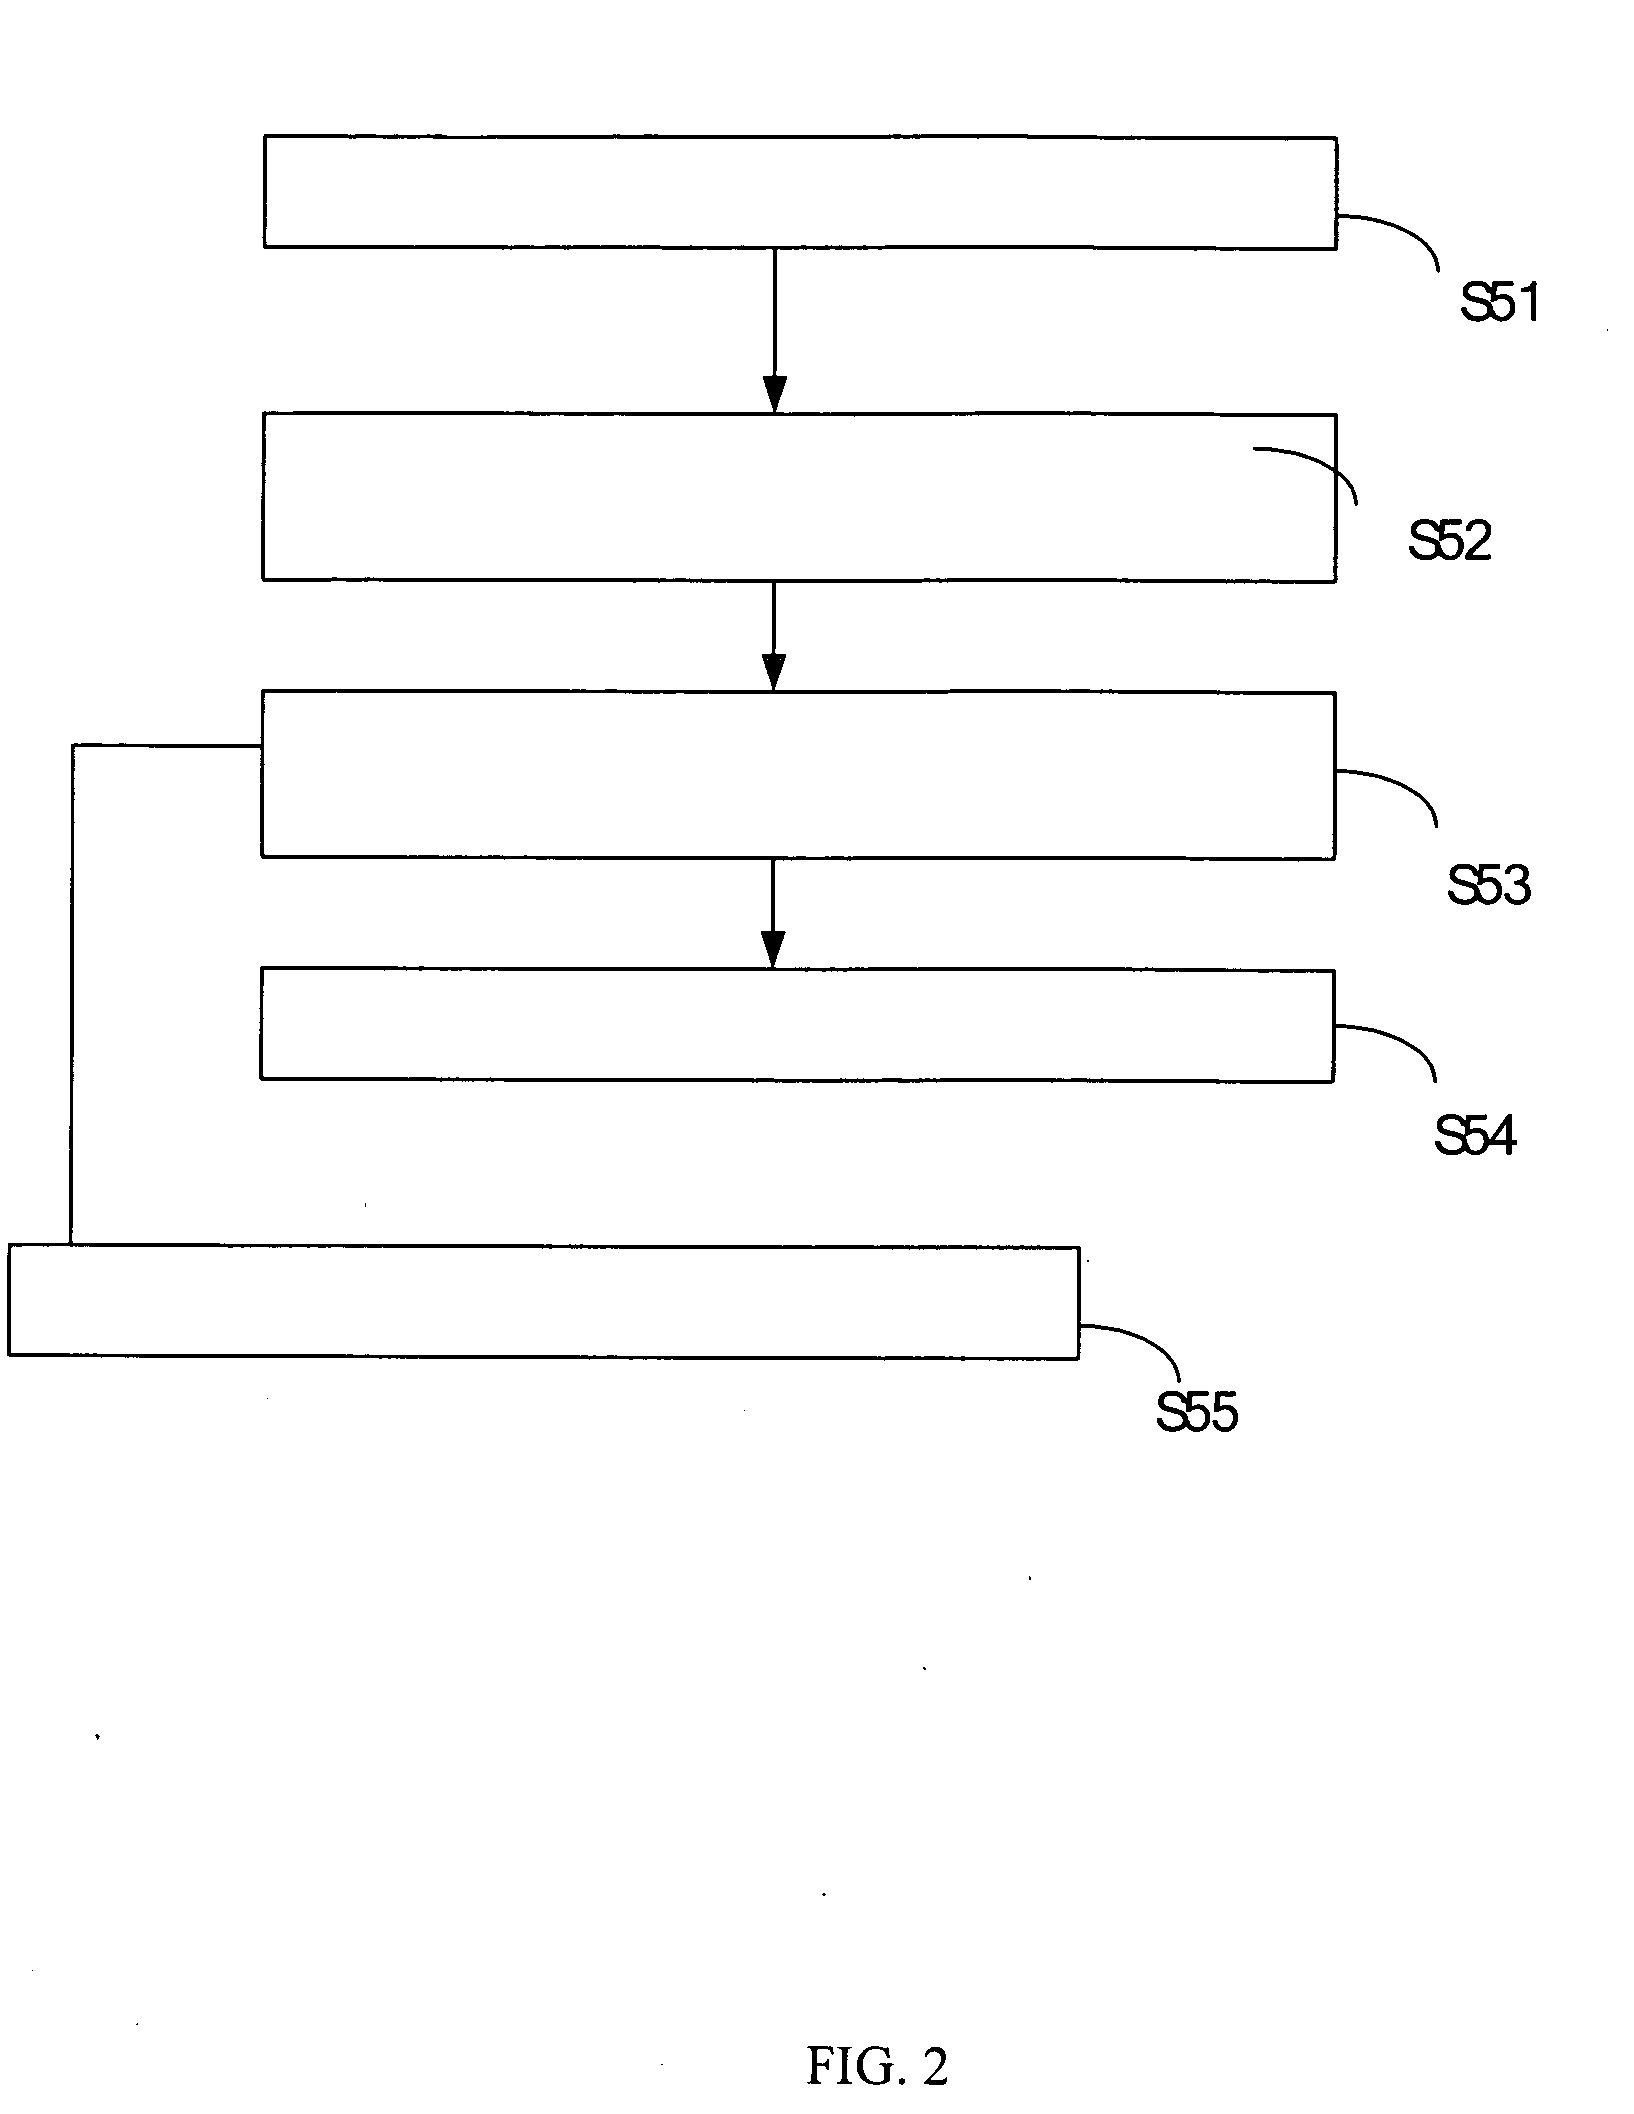 Network security system and methods regarding the same